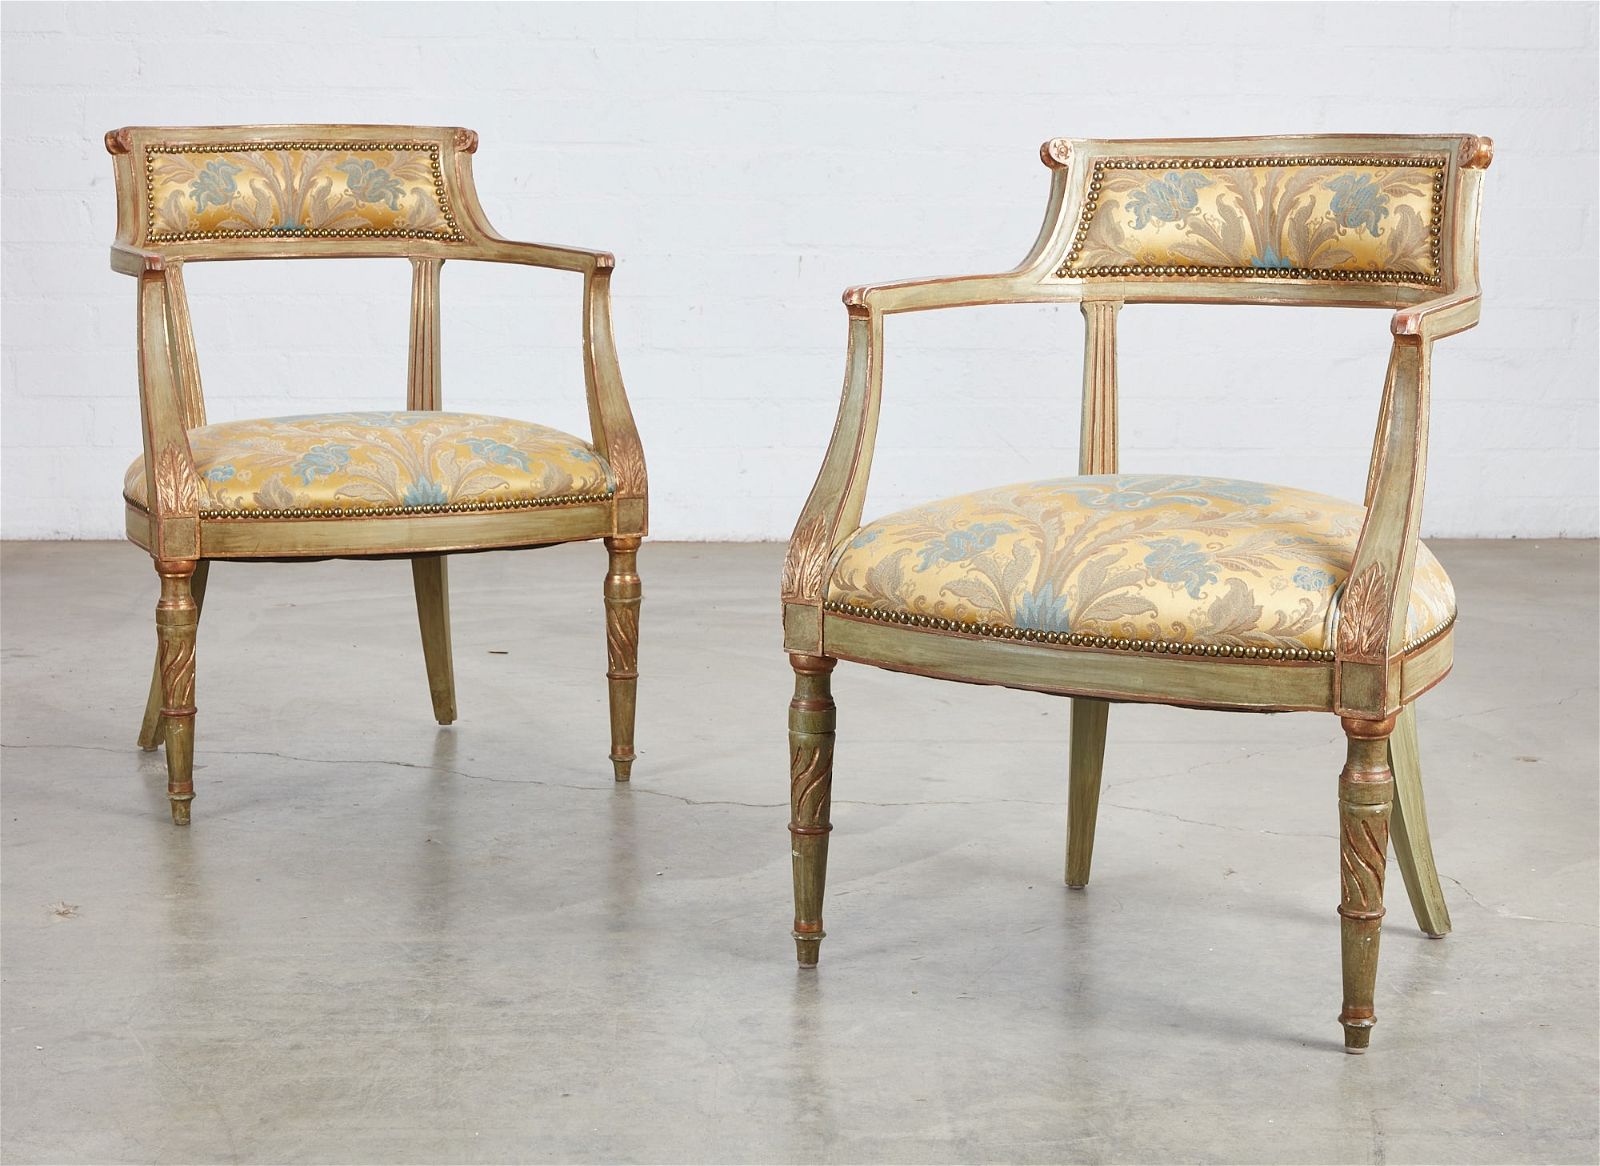 A PAIR OF LOUIS XVI STYLE DECORATED